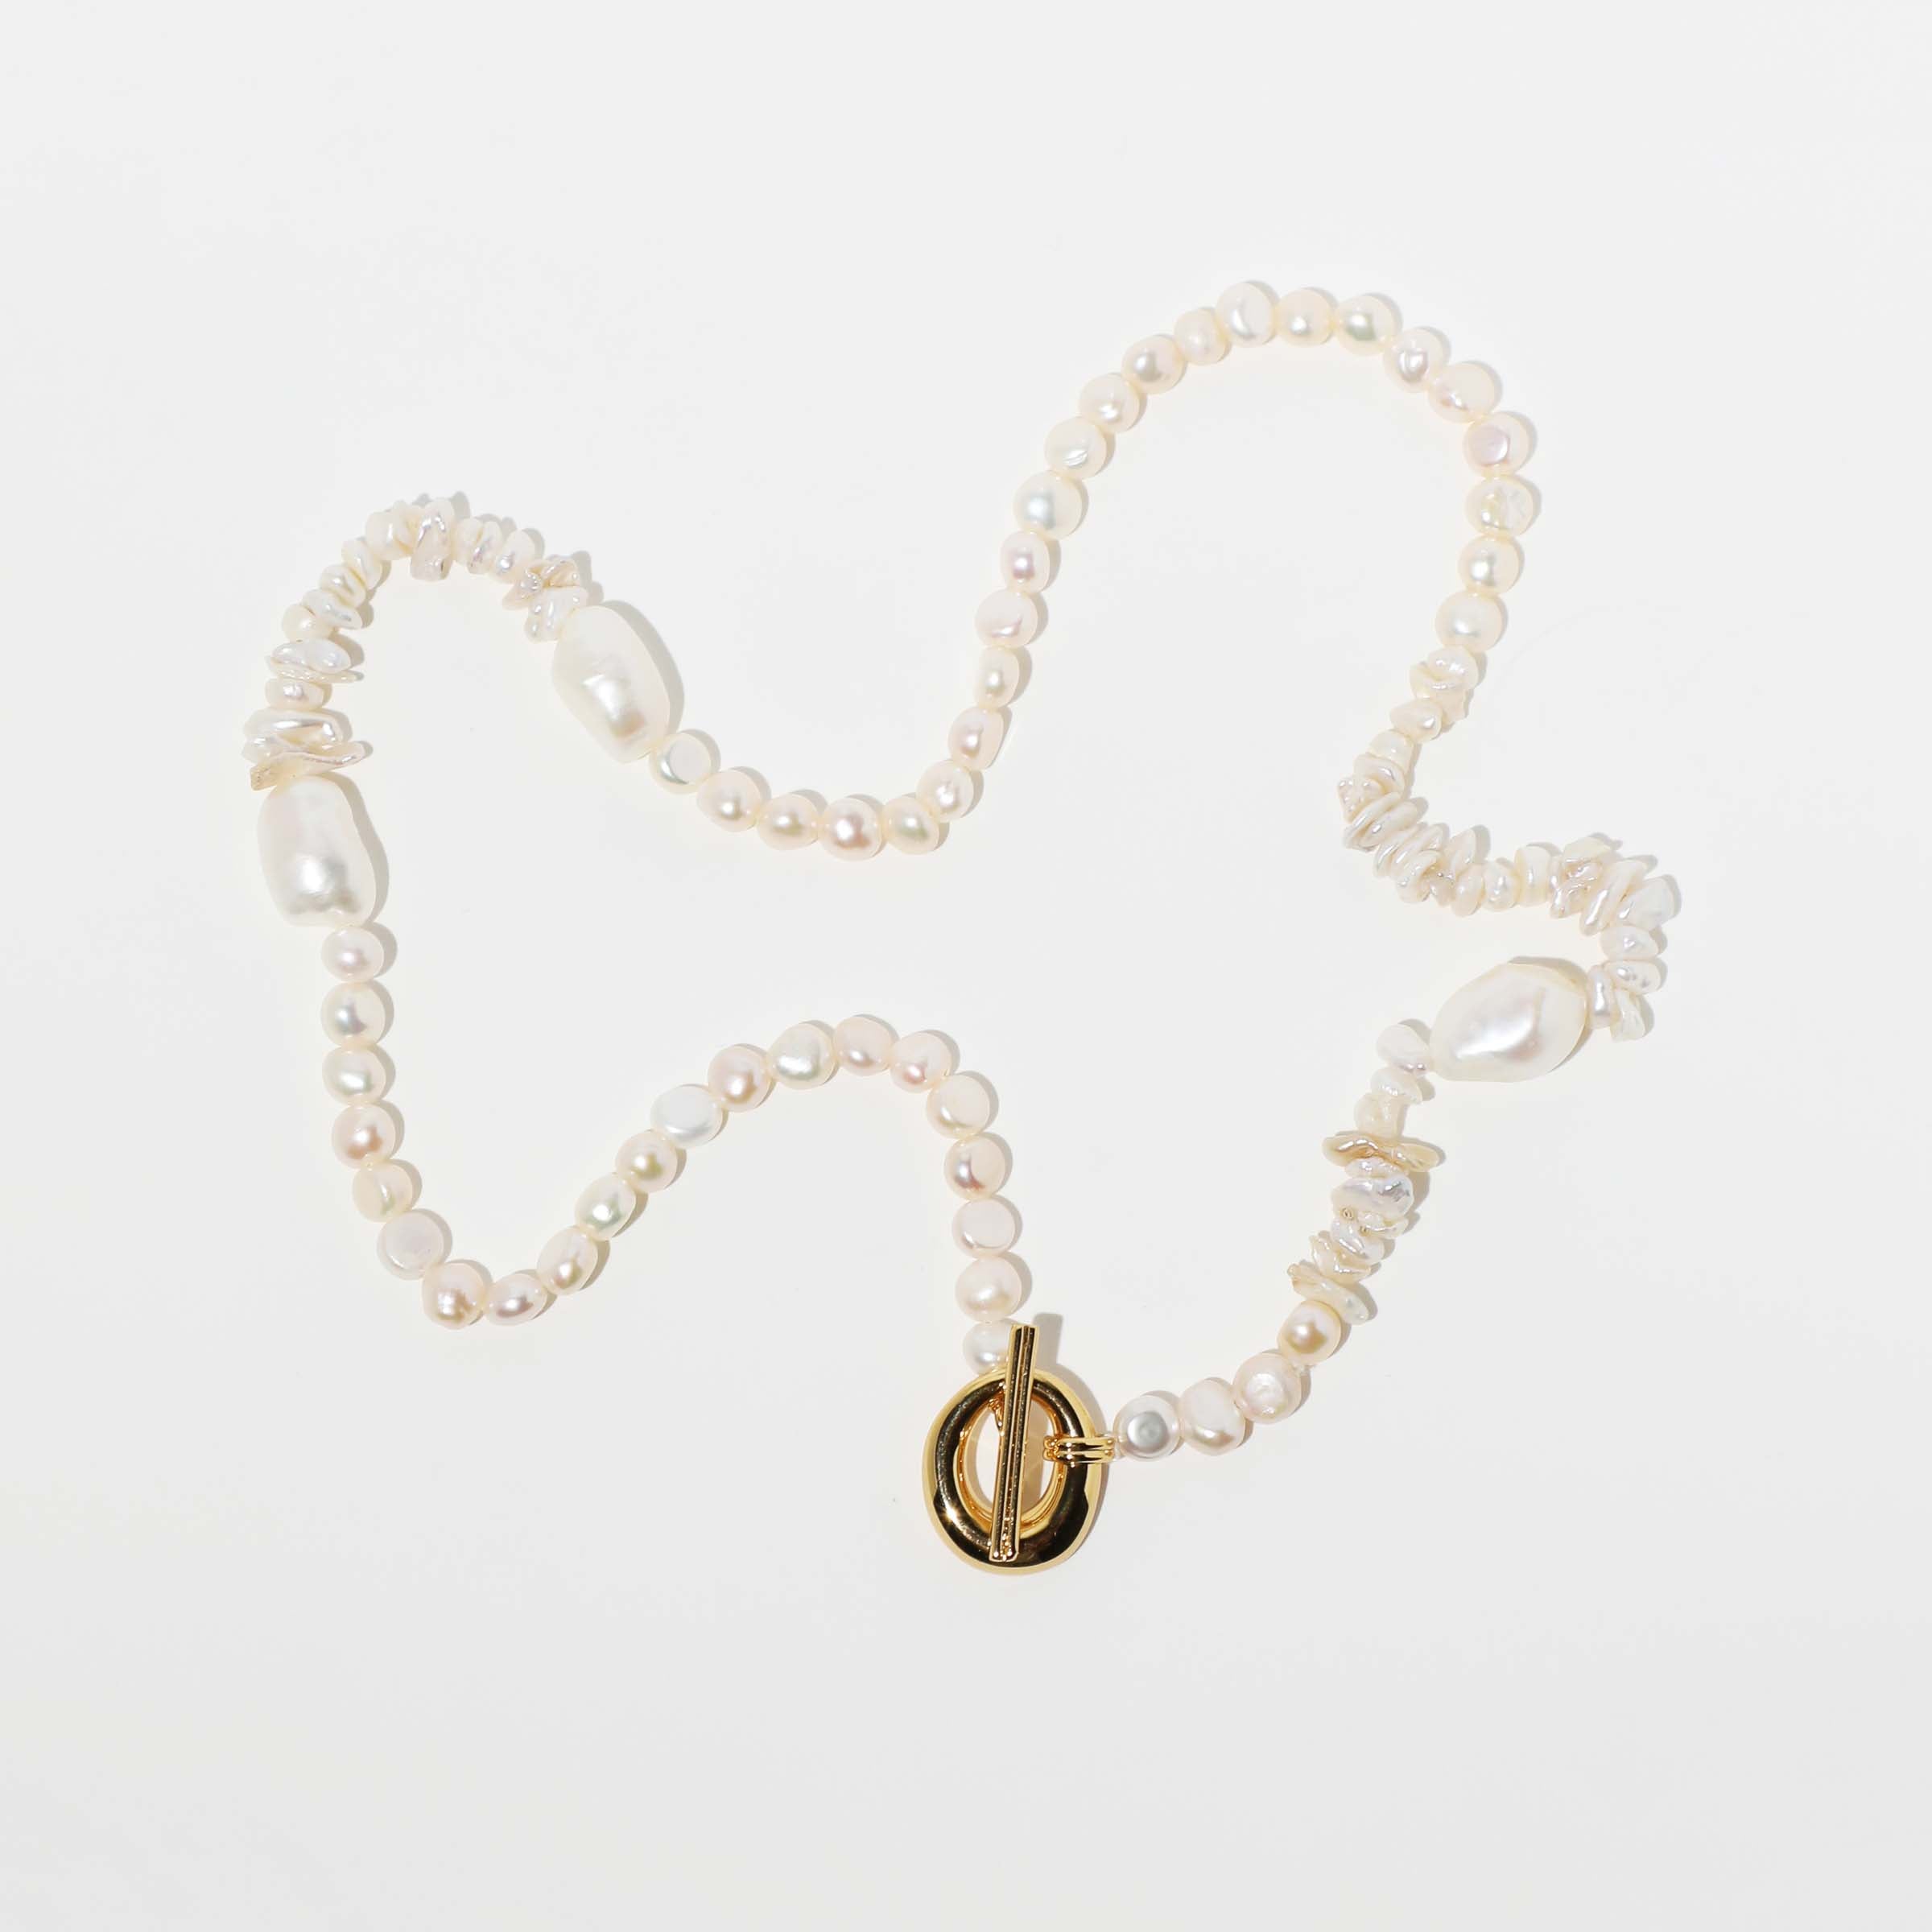 Serenity Pearl Beaded T-Bar Necklace in Gold flat lay